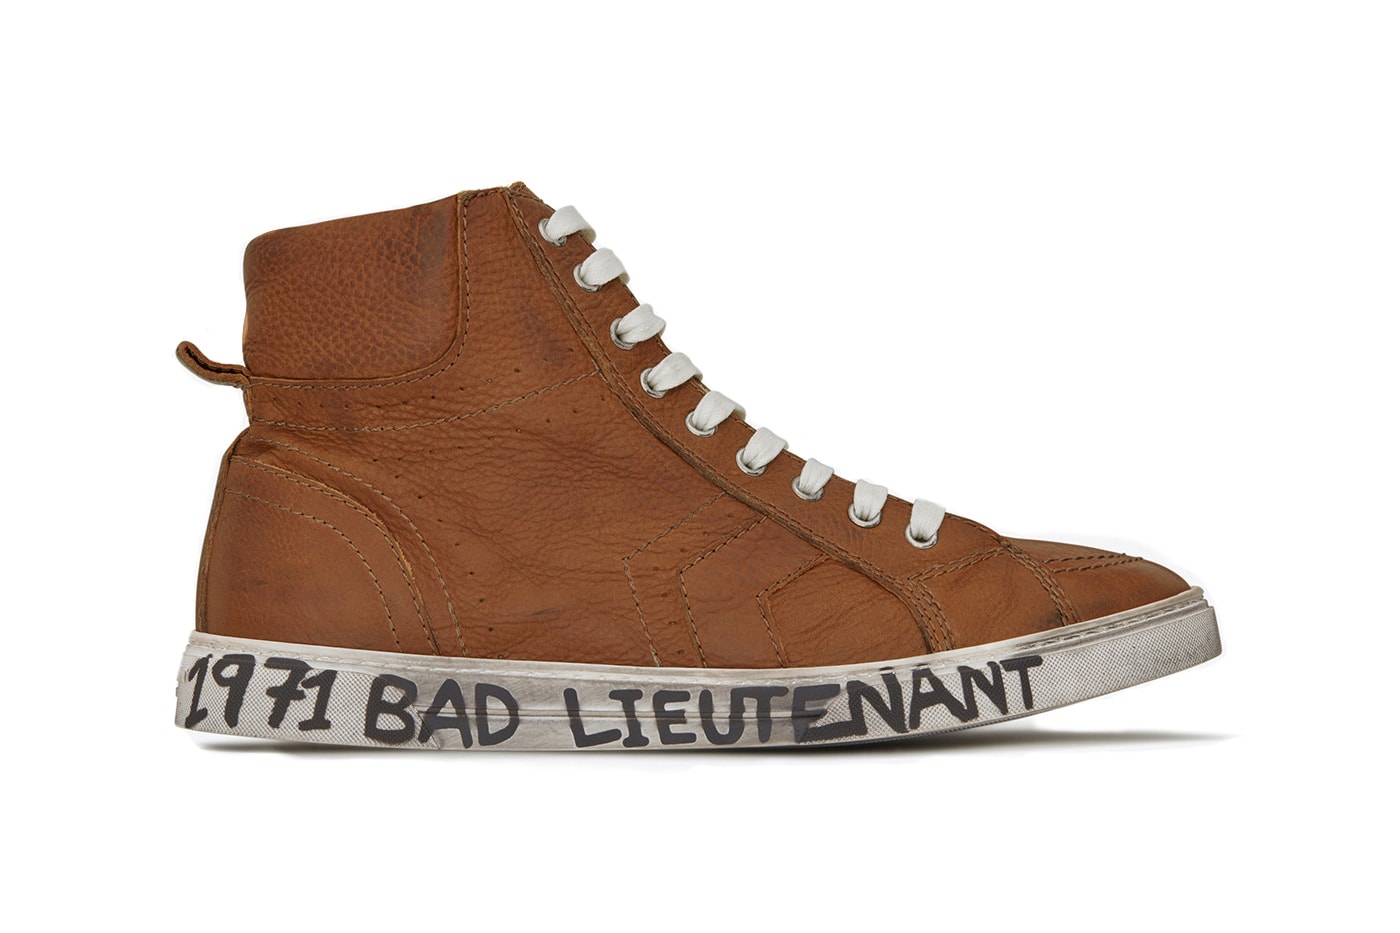 Saint Laurent Joe Sneakers With Midsole Writing off-white virgil abloh yves shoes kicks bad lieutenant smoking forever leather high top